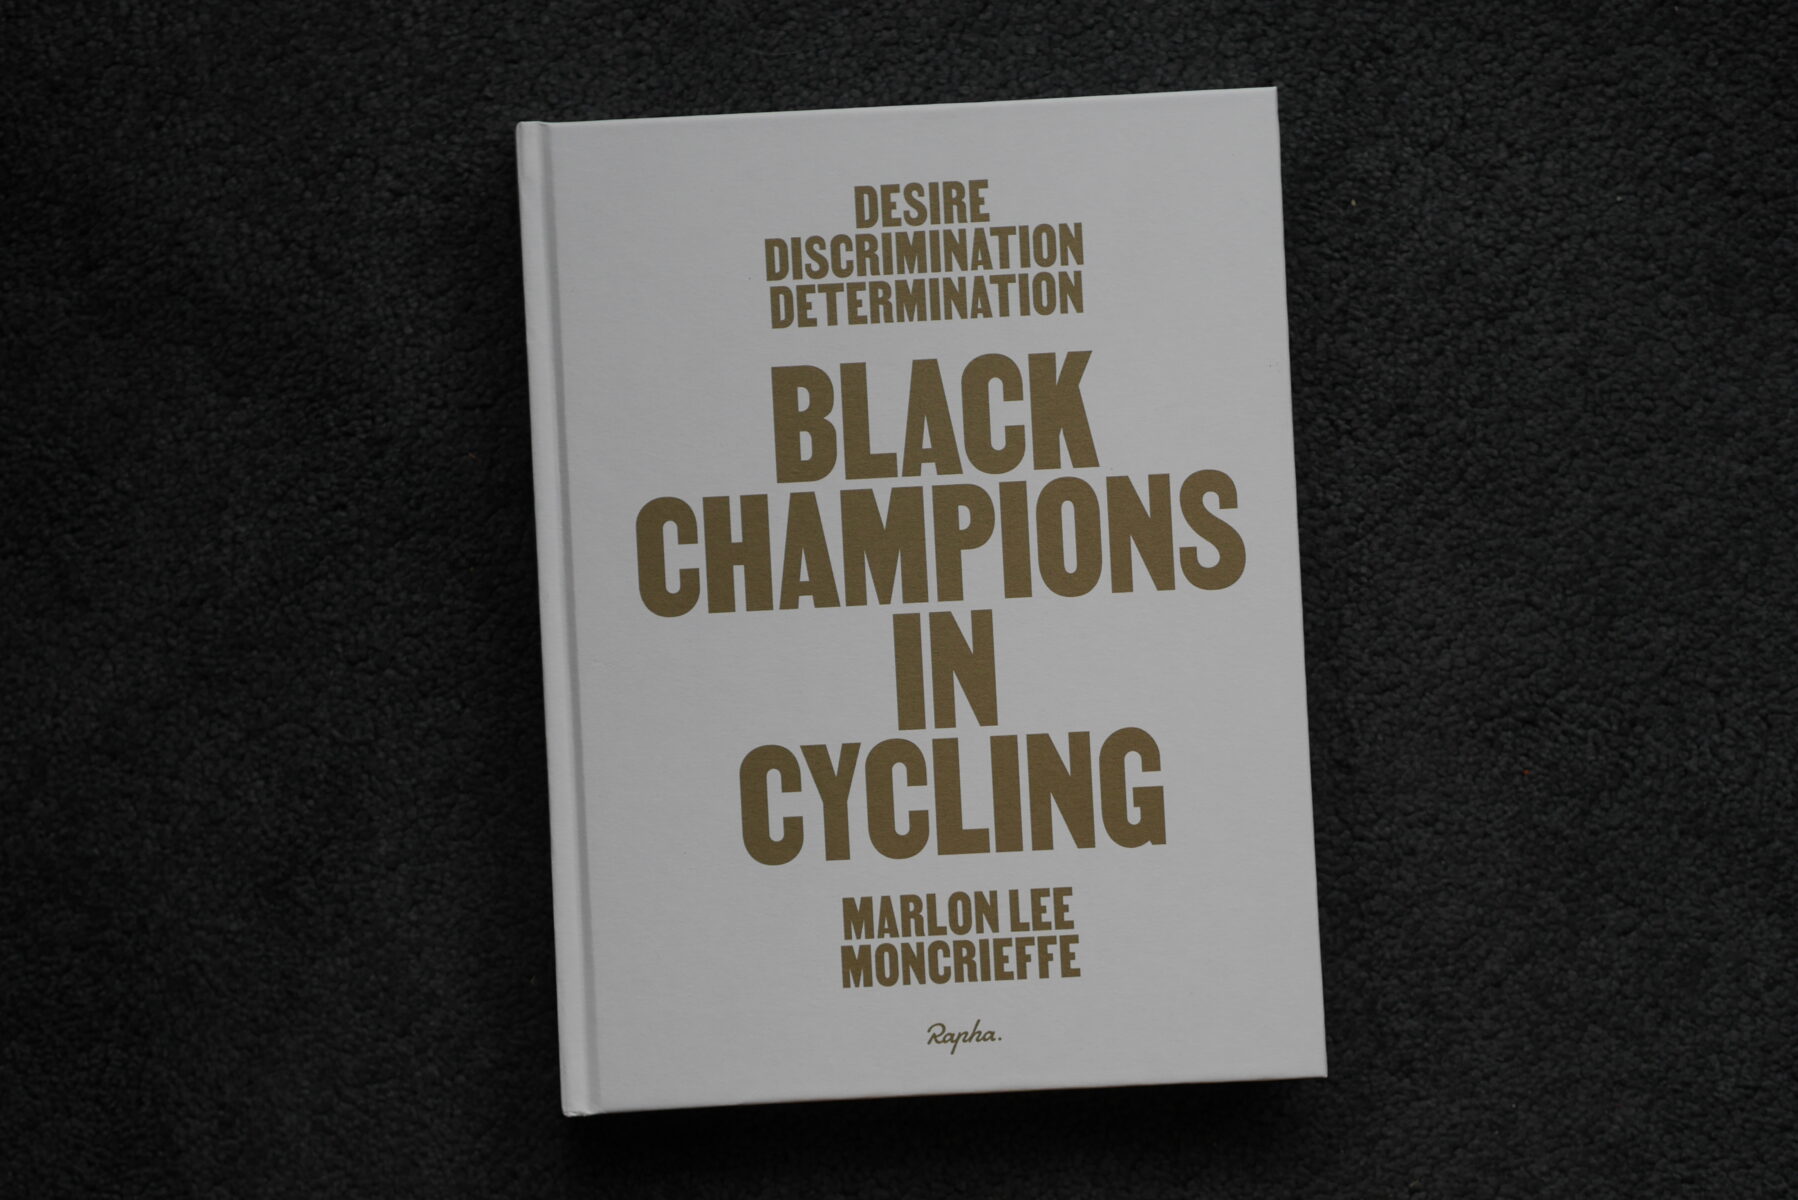 Black Champions In Cycling by Marlon Lee Moncrieffe